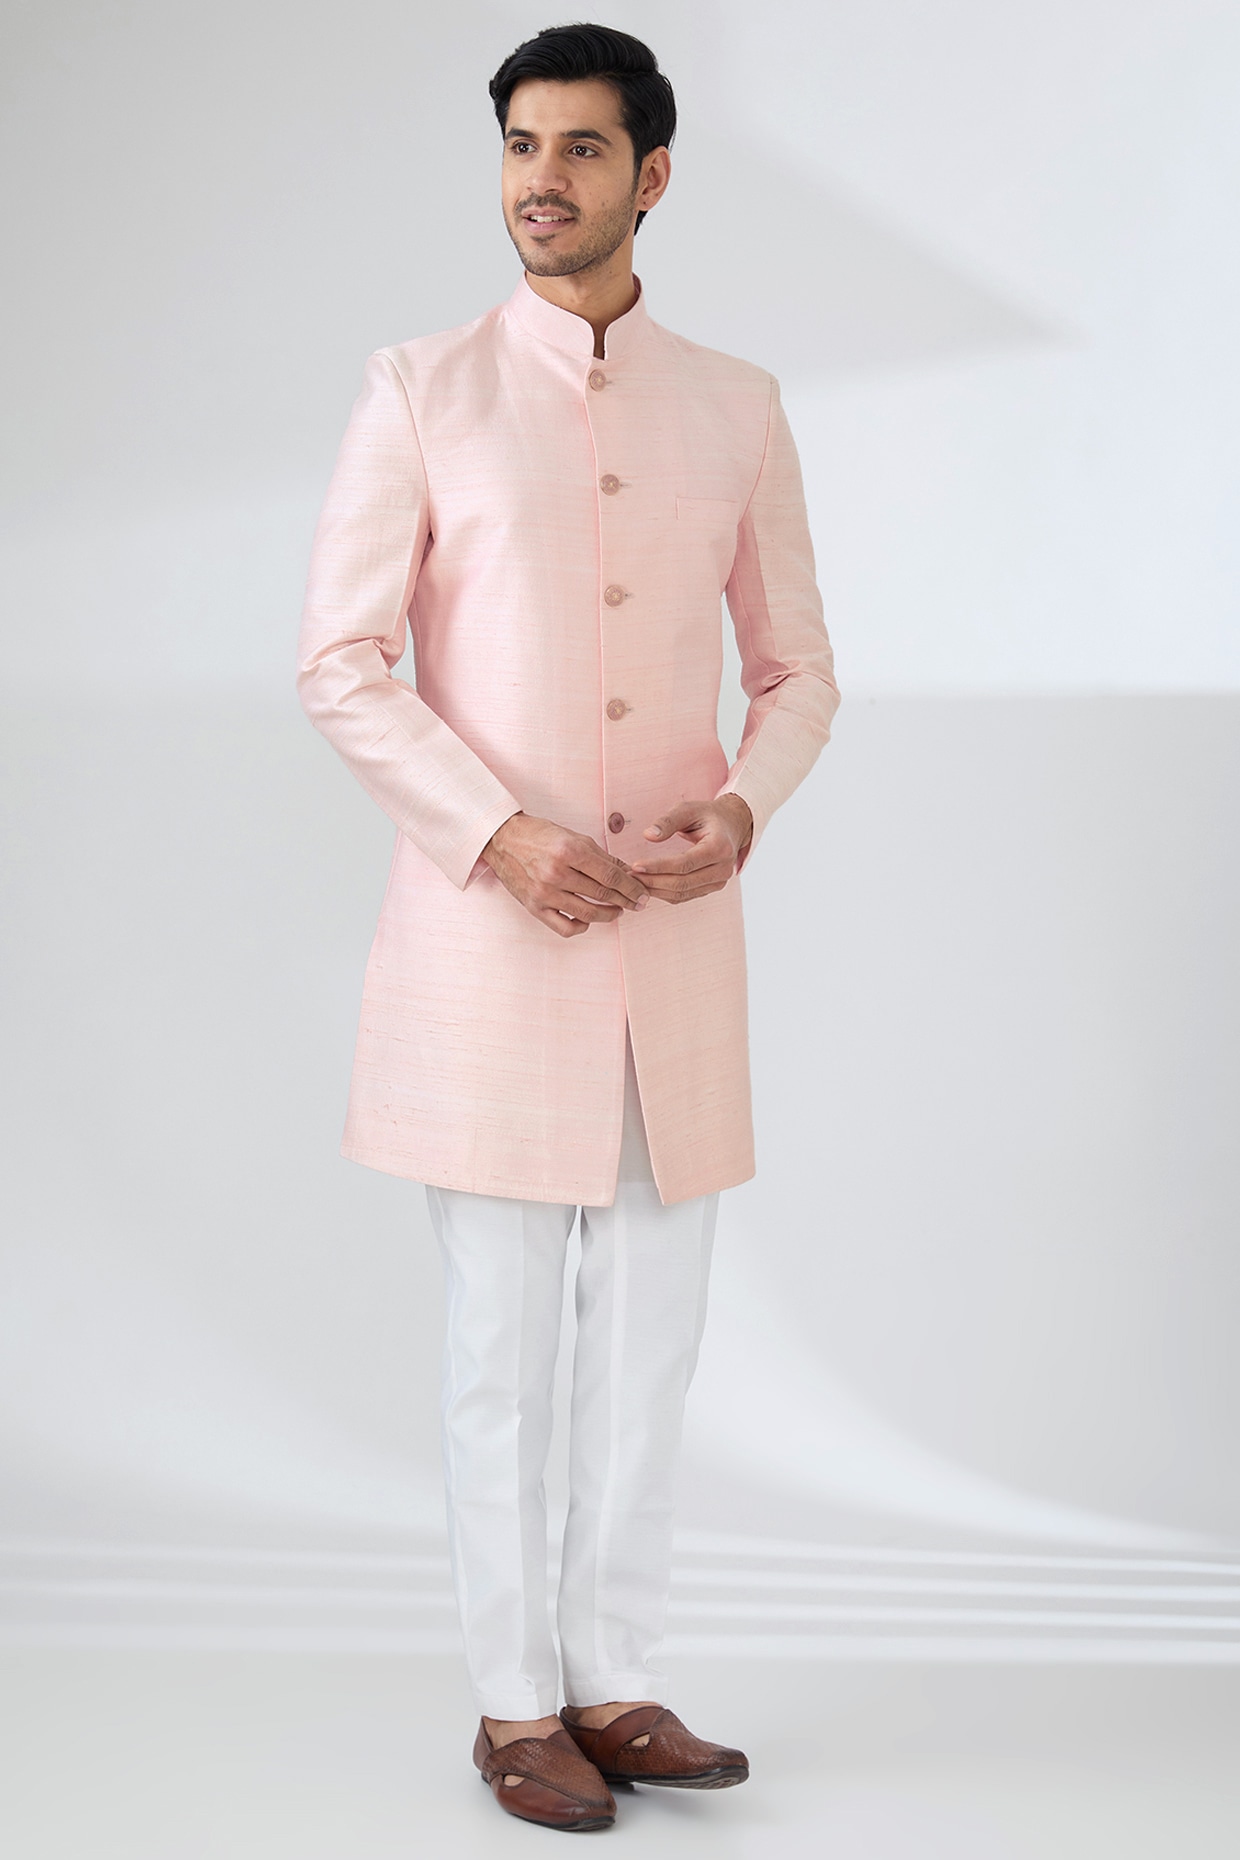 Our signature Cream Nehru Jacket, customise with deer printed pocket. Look  your royal best in choicest of garments from HOUSE OF JHAB. �... | Instagram